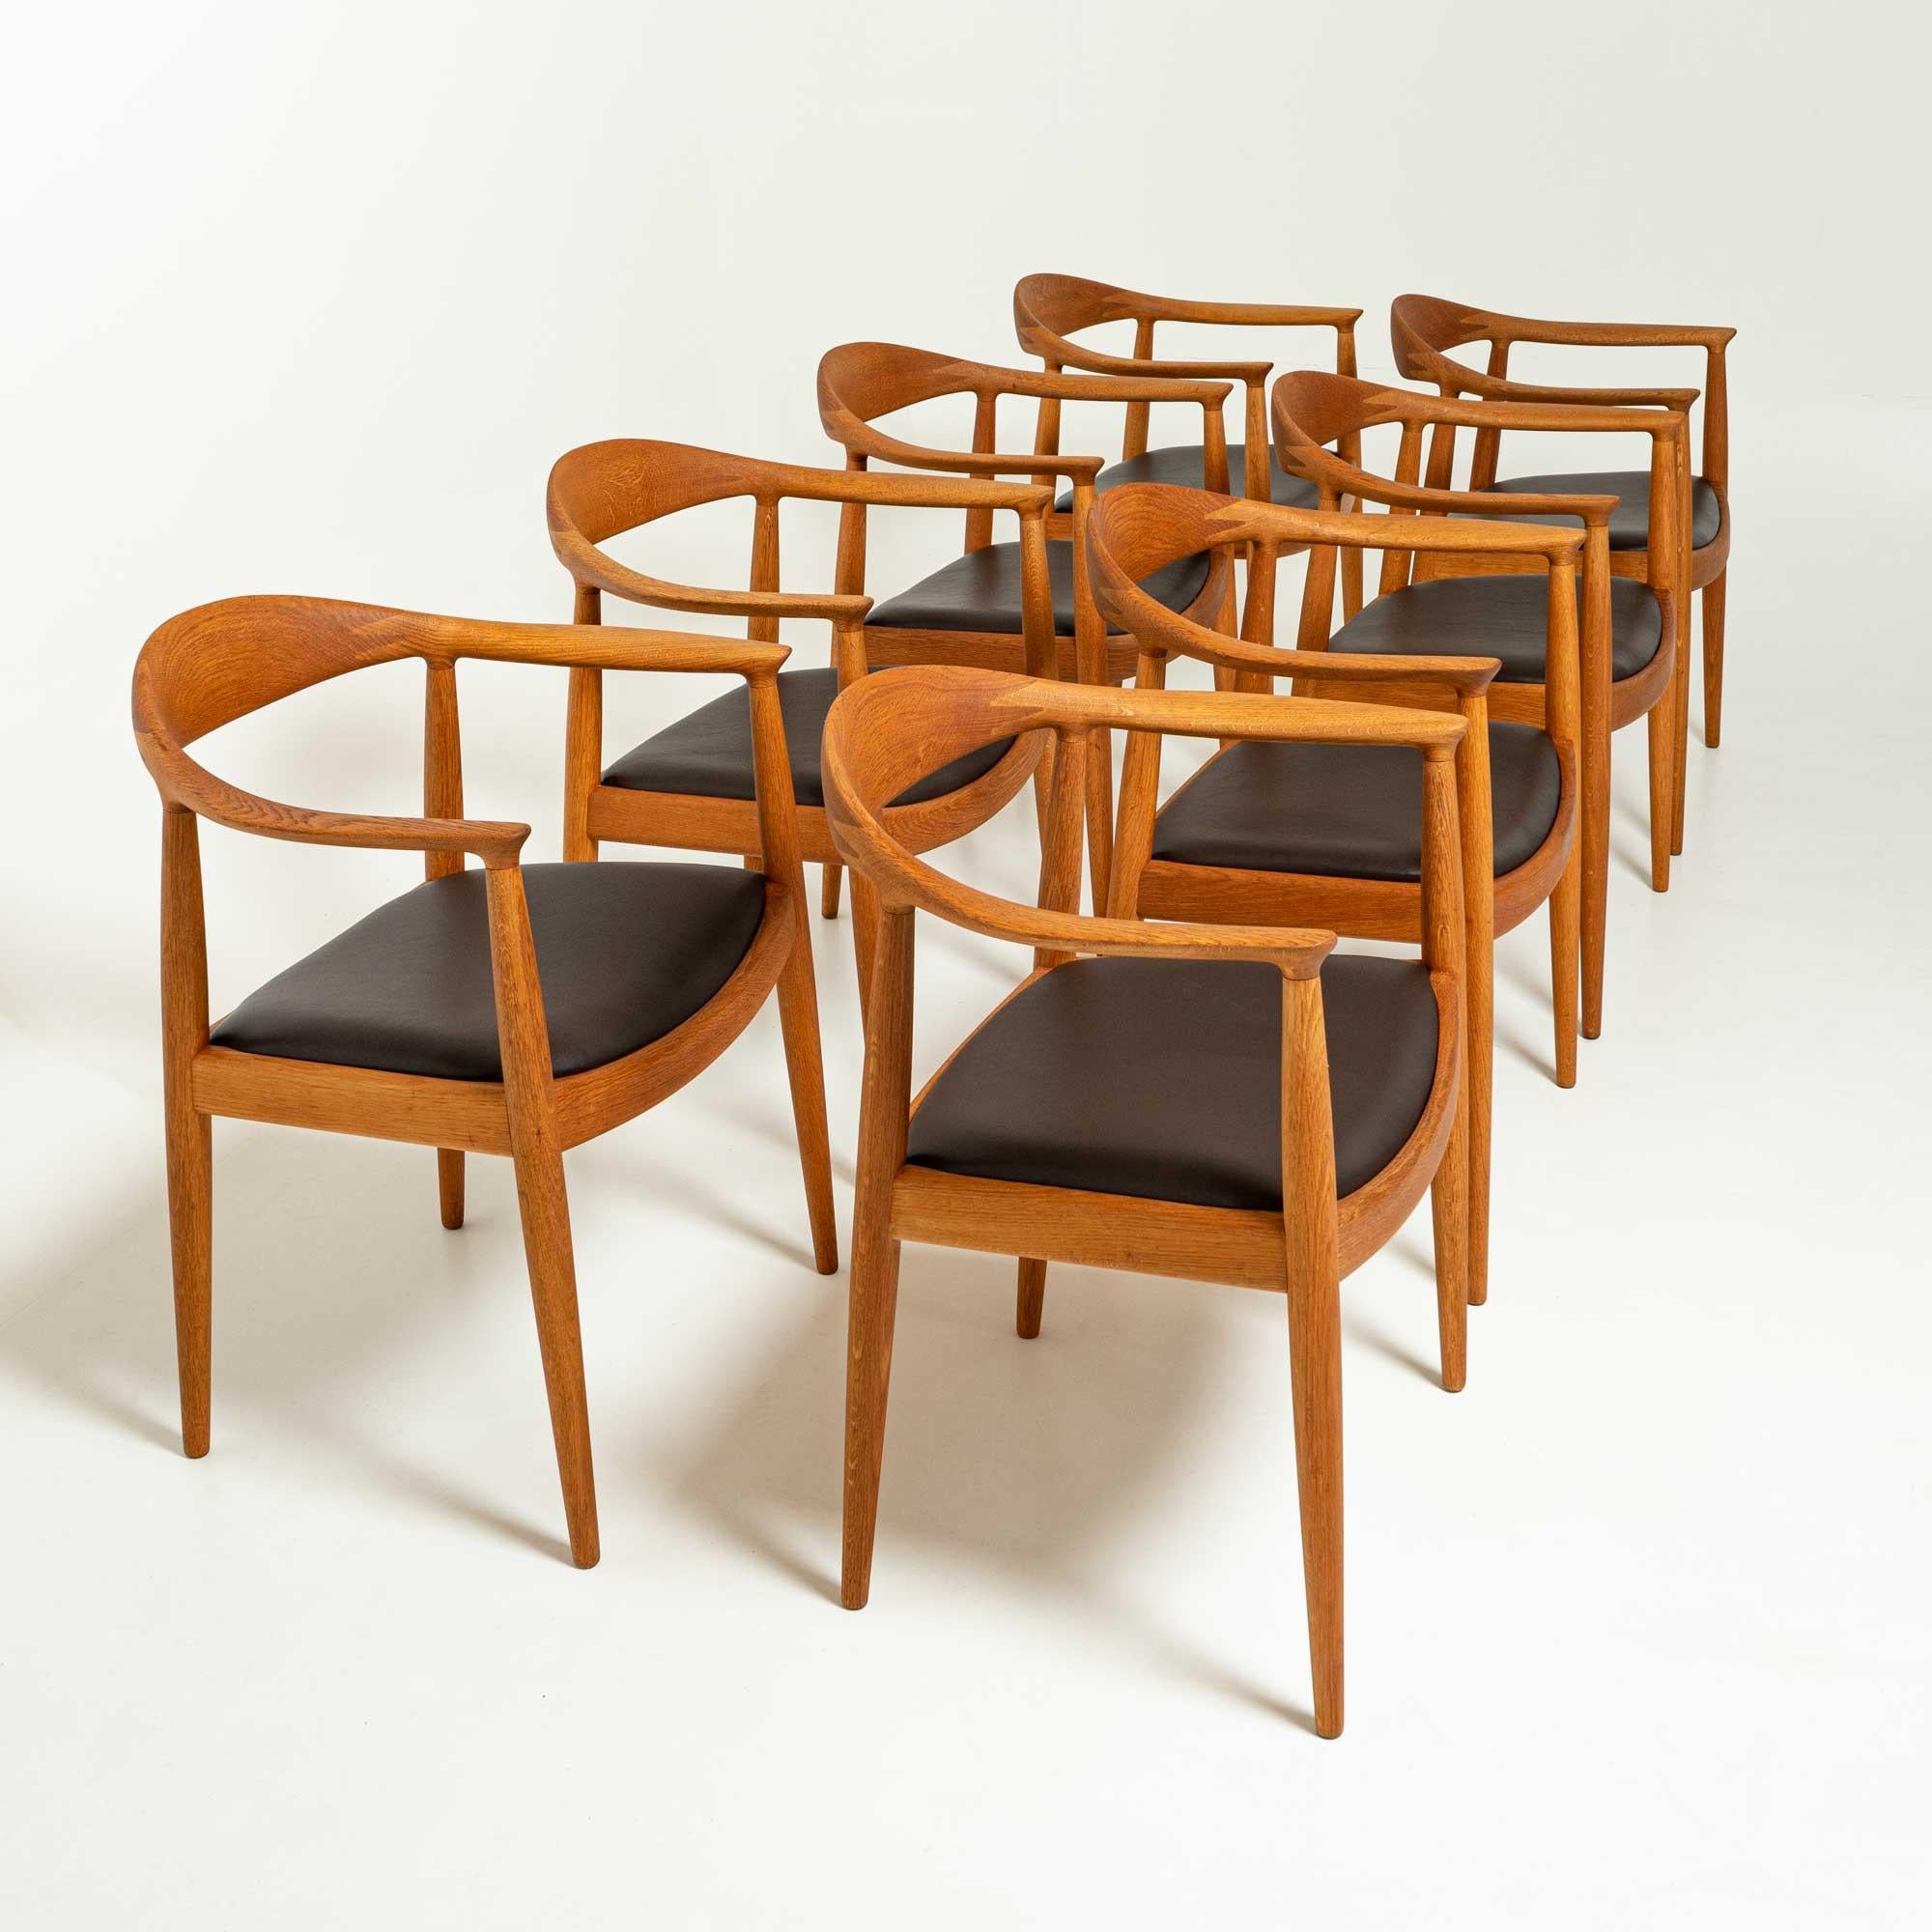 Other Set of 8 Hans Wegner JH503 Round Chairs in Oak & Edelman Chocolate Leather